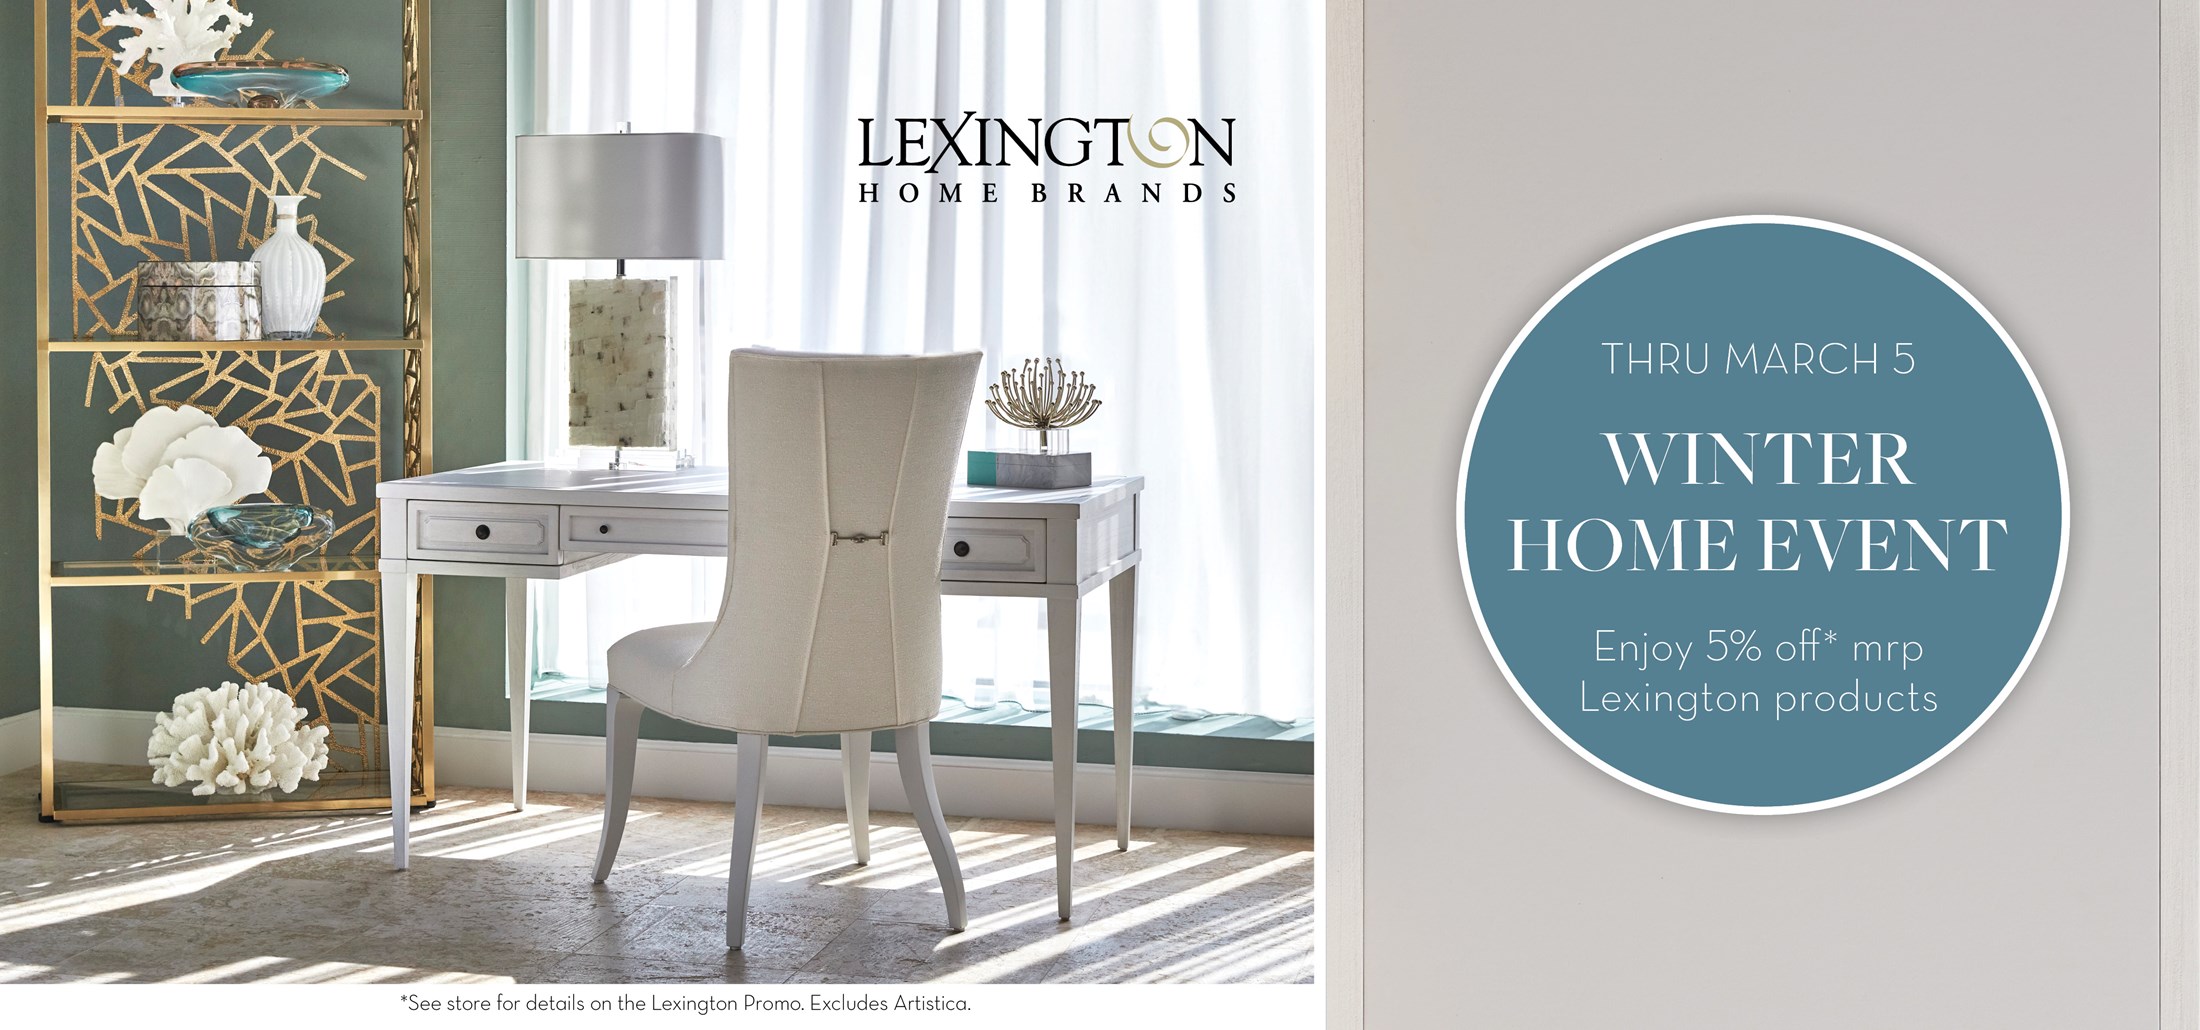 Image of a desk and chair next to a golden etagere. Text: Lexington Home Brands. Thru March 5. Winter Home Event. Enjoy 5% off* Mrp Lexington Products. See store for details on the Lexington Promo. Excludes Artistica.